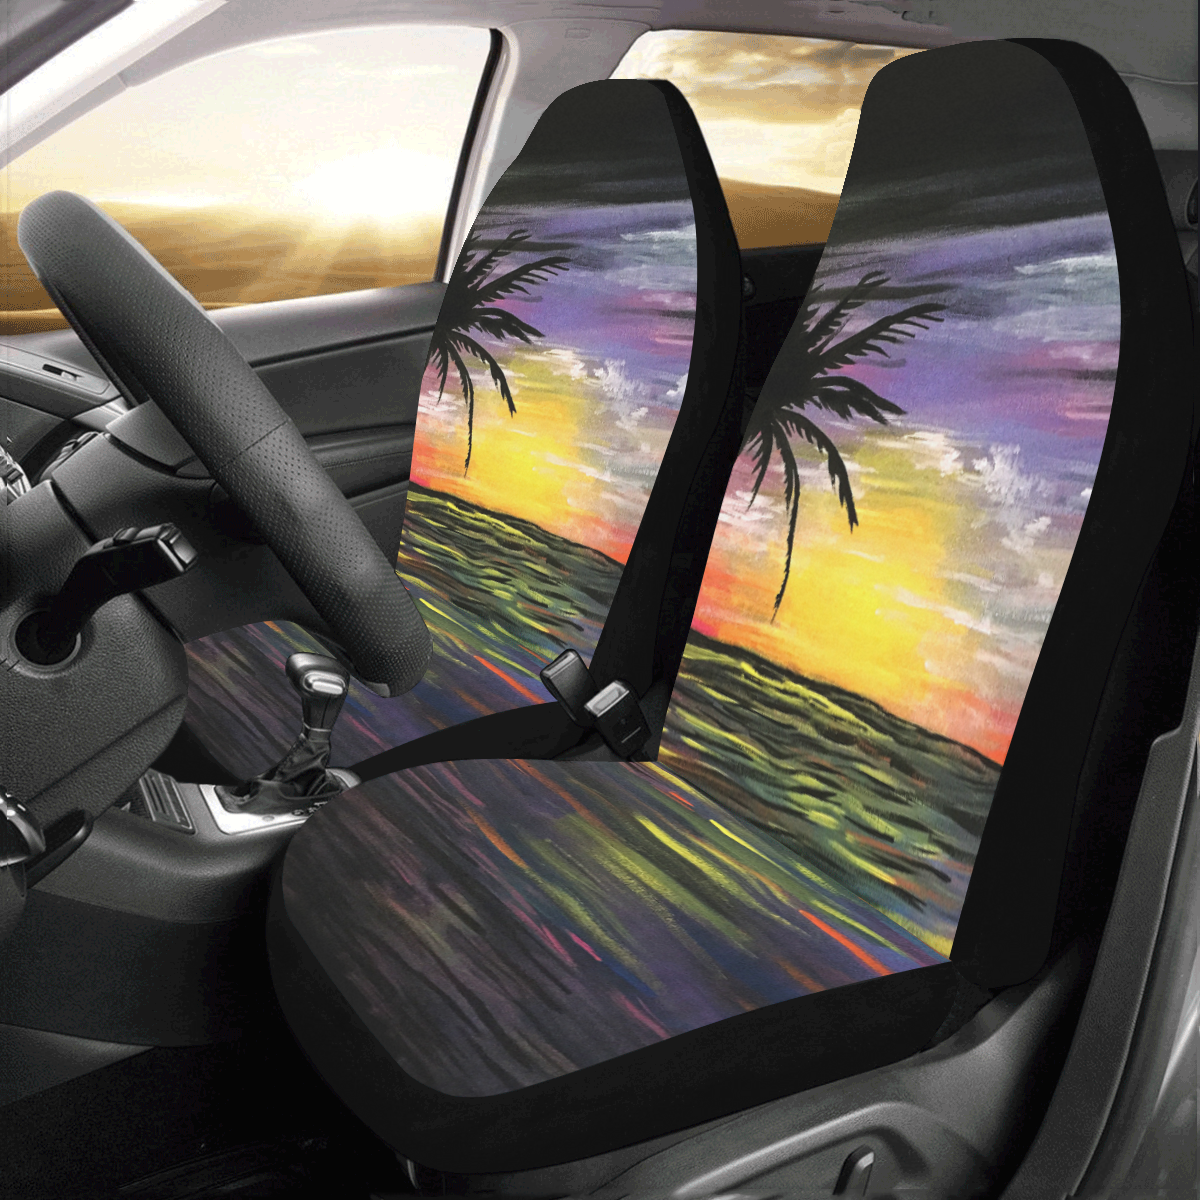 Sunset Sea Car Seat Covers (Set of 2)